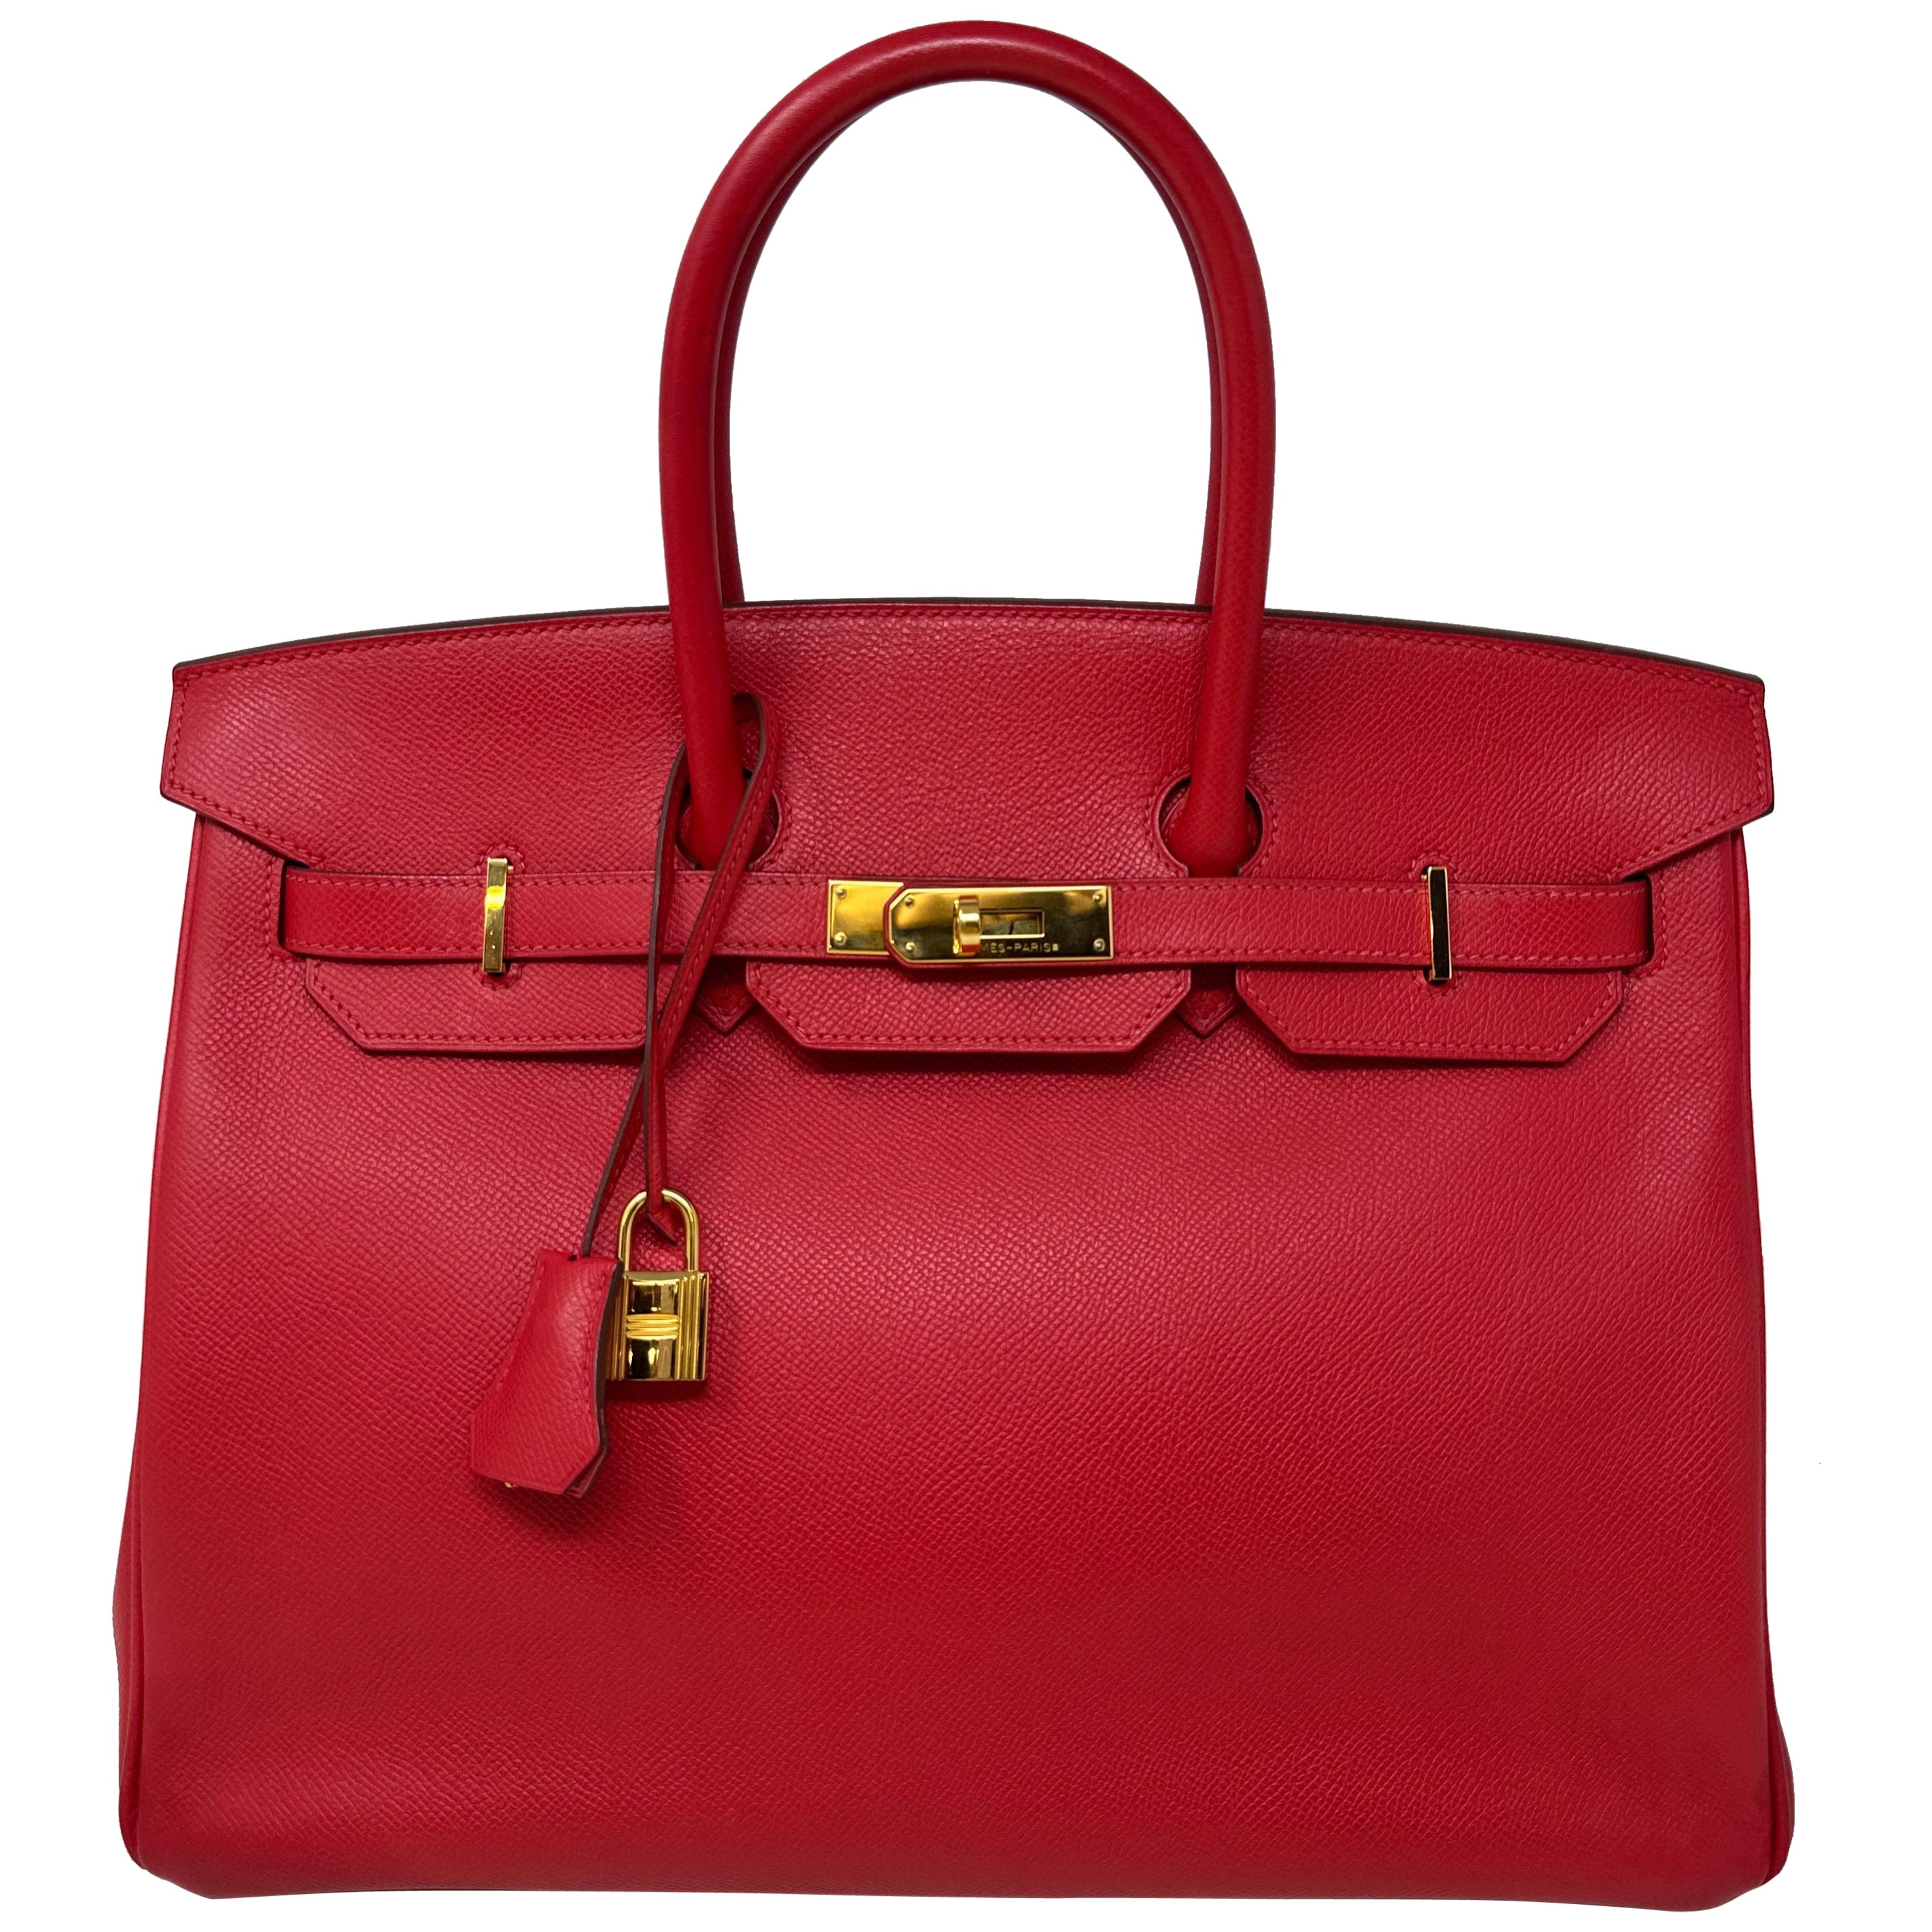 REVIEWING MY HERMÈS BIRKIN 25 VS 30 SIZE  WHAT FITS, MODSHOTS, PROS & CONS  **WHICH ONE IS BETTER** 